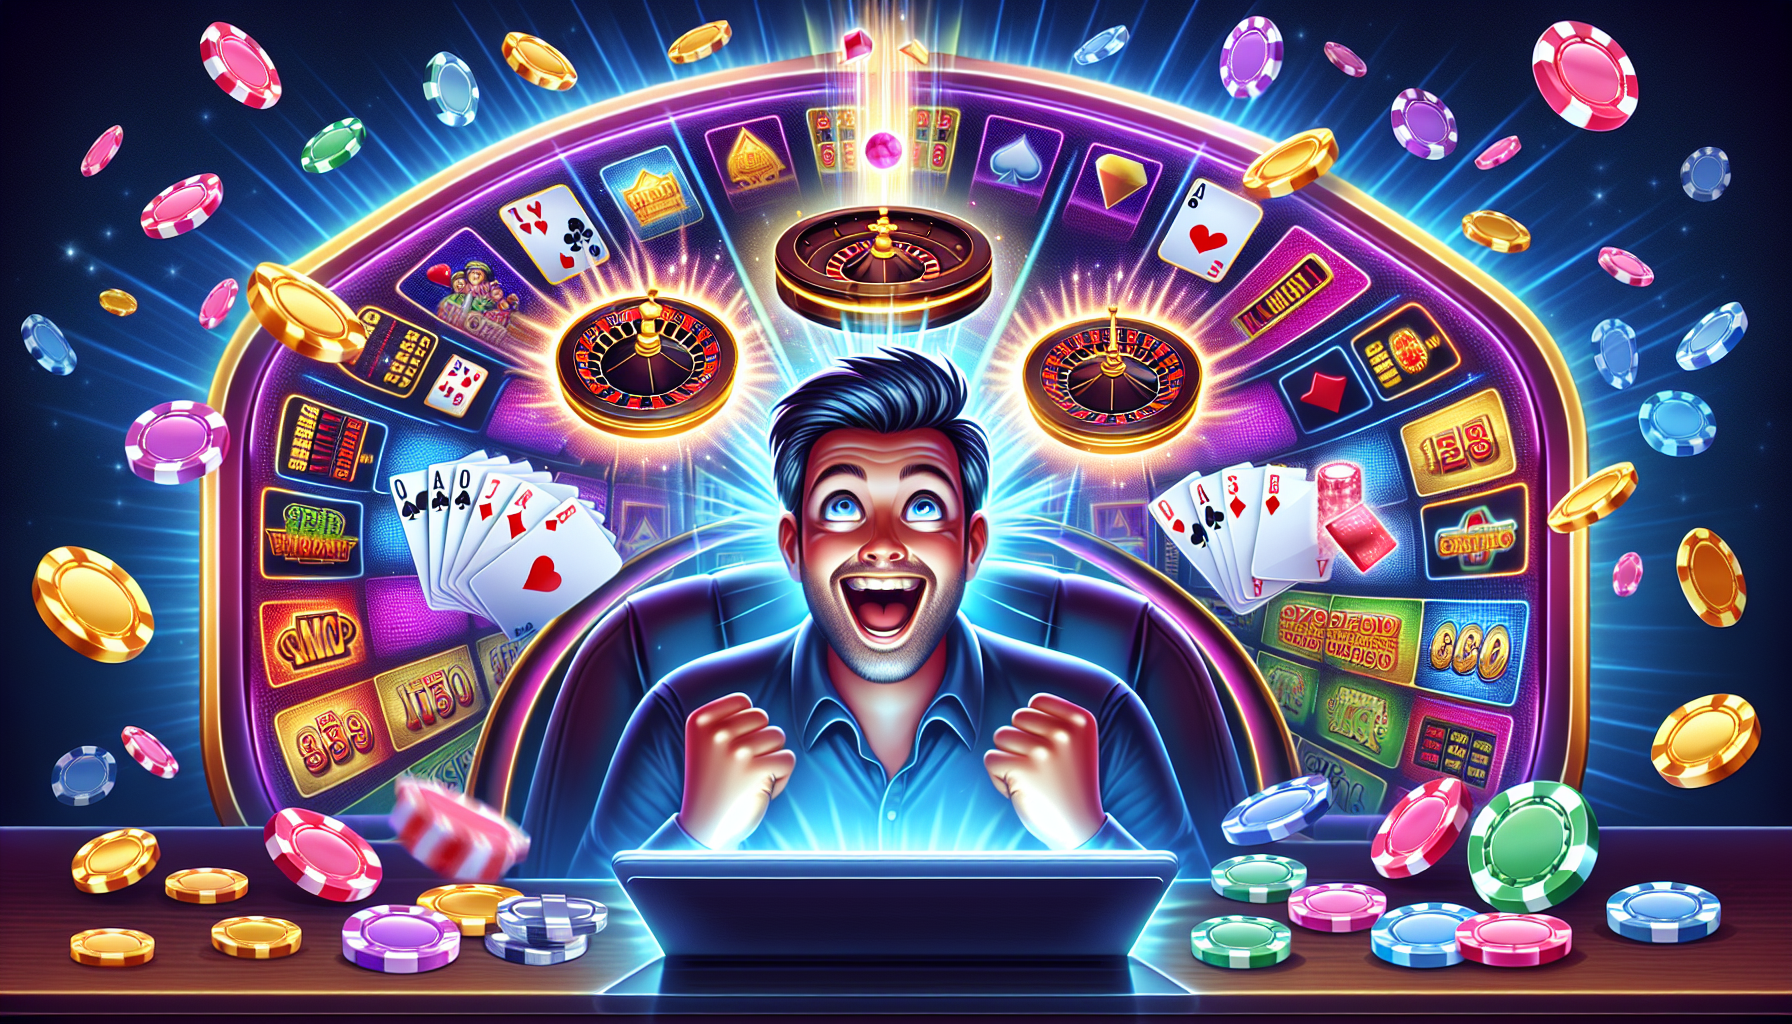 Exciting real money casino games with progressive jackpots